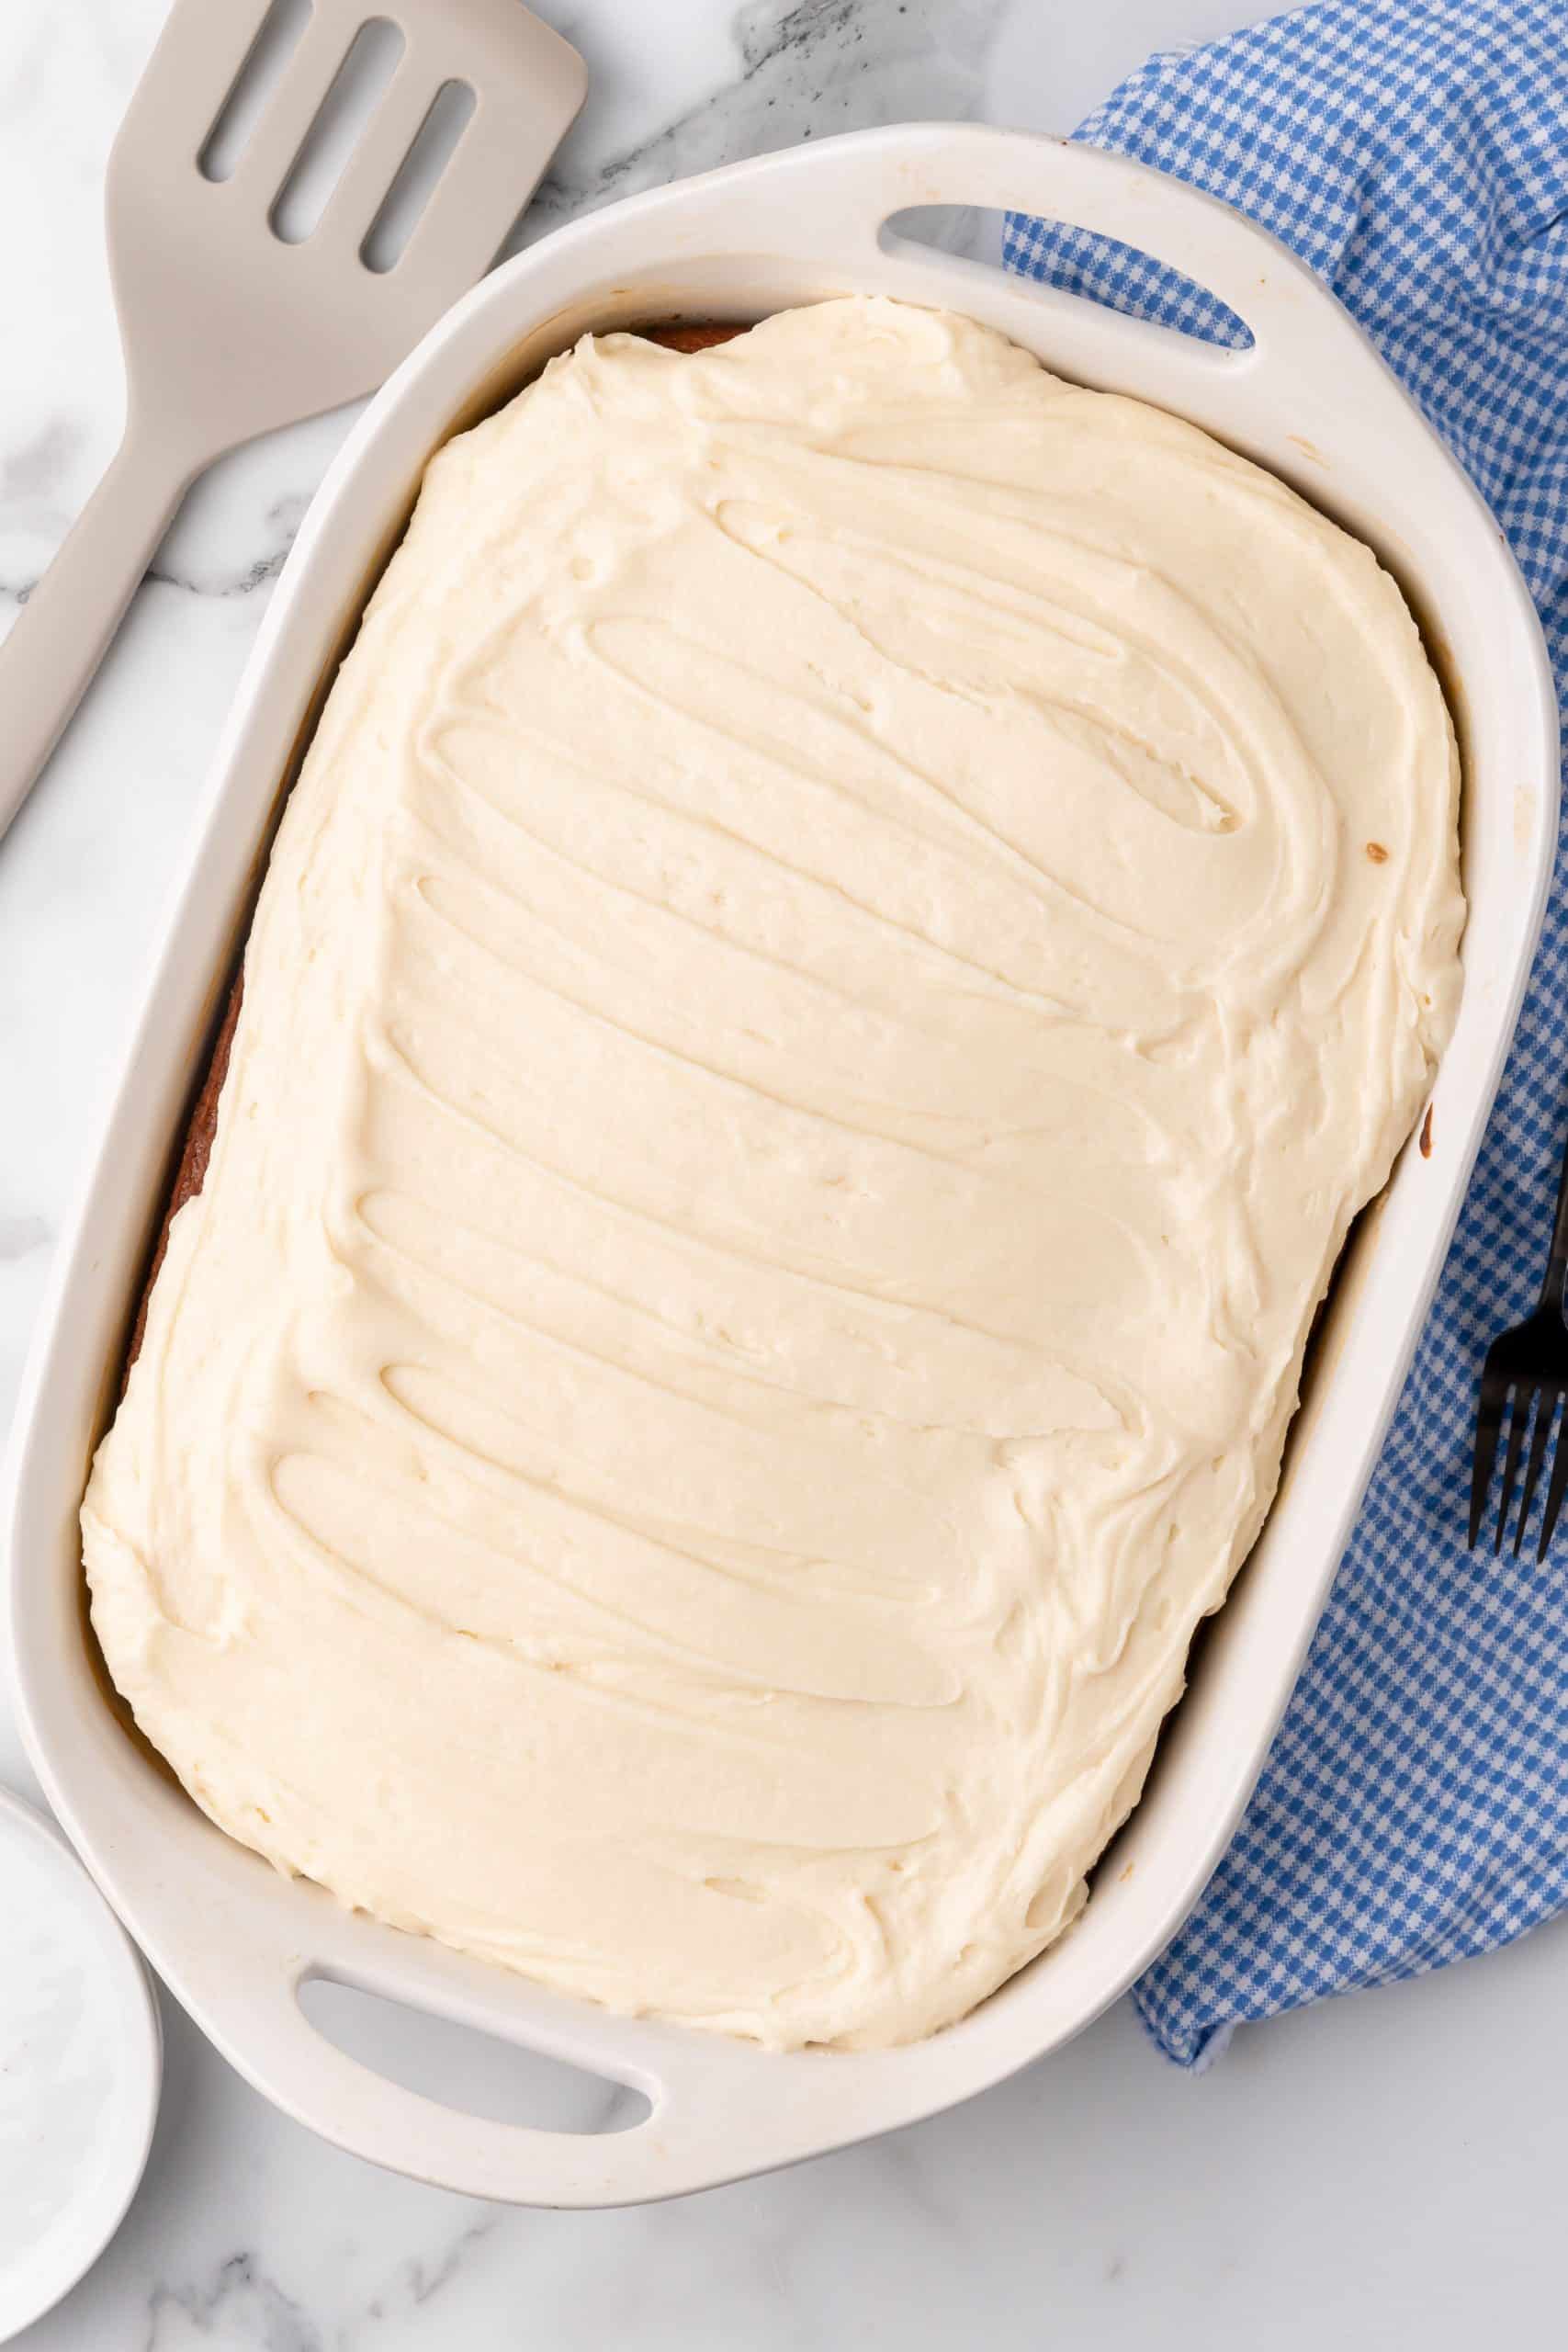 cream cheese icing frosted tomato soup cake in a white baking dish